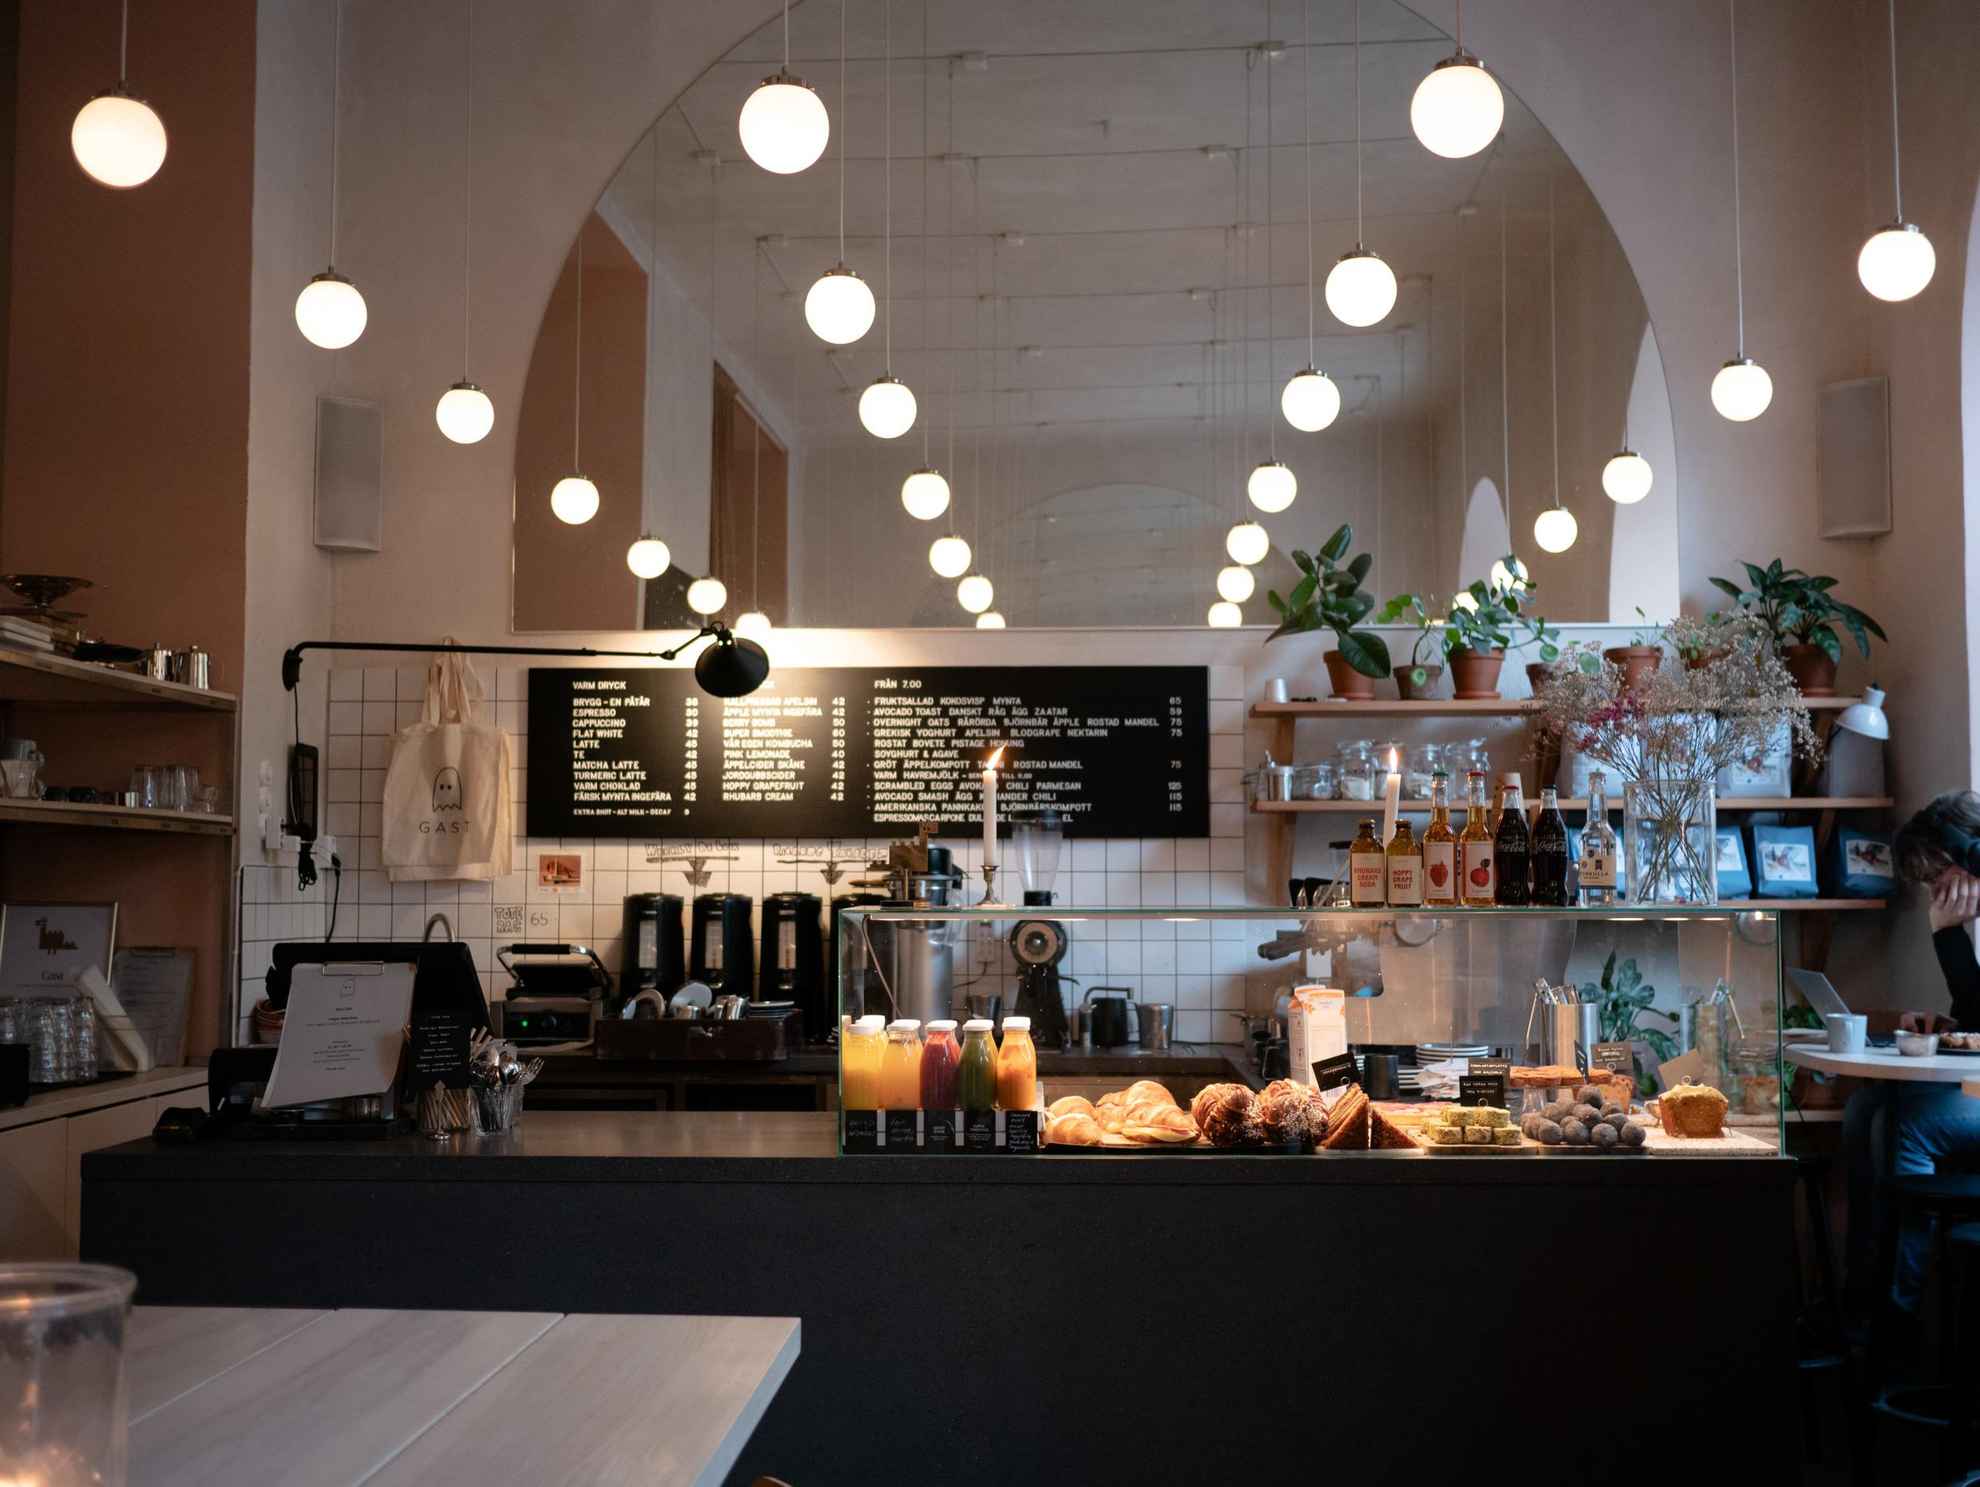 A serving counter with buns, bread, pastries and various soft drinks in a cafe. Behind the counter a coffee machine. In the ceiling hangs several small globe lights.